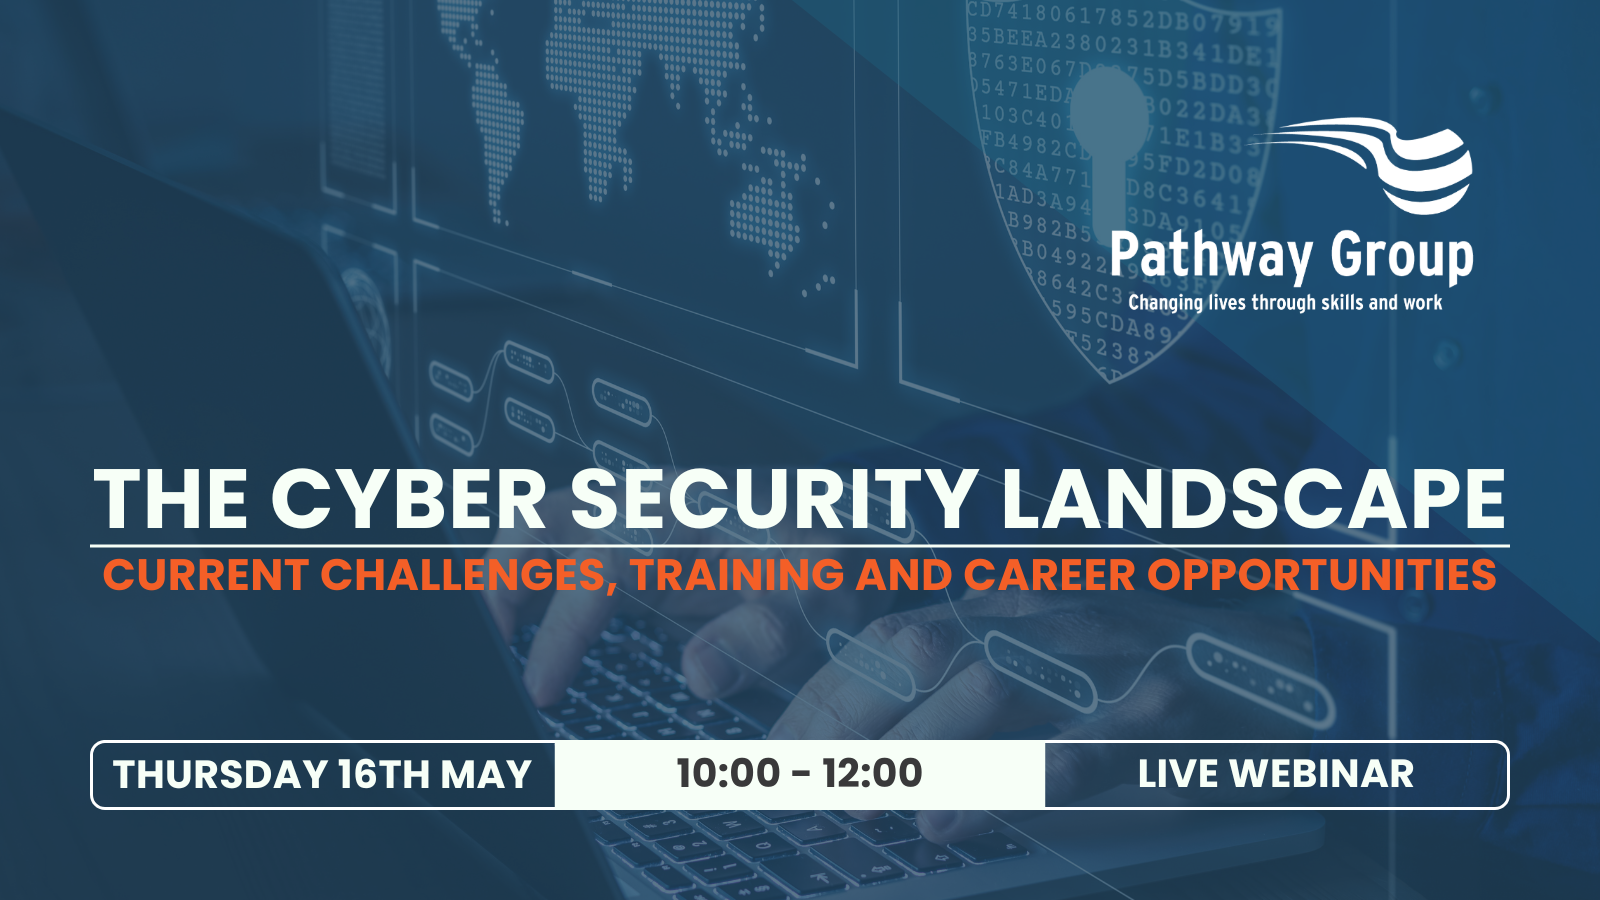 The Cyber Security Landscape event cover photo